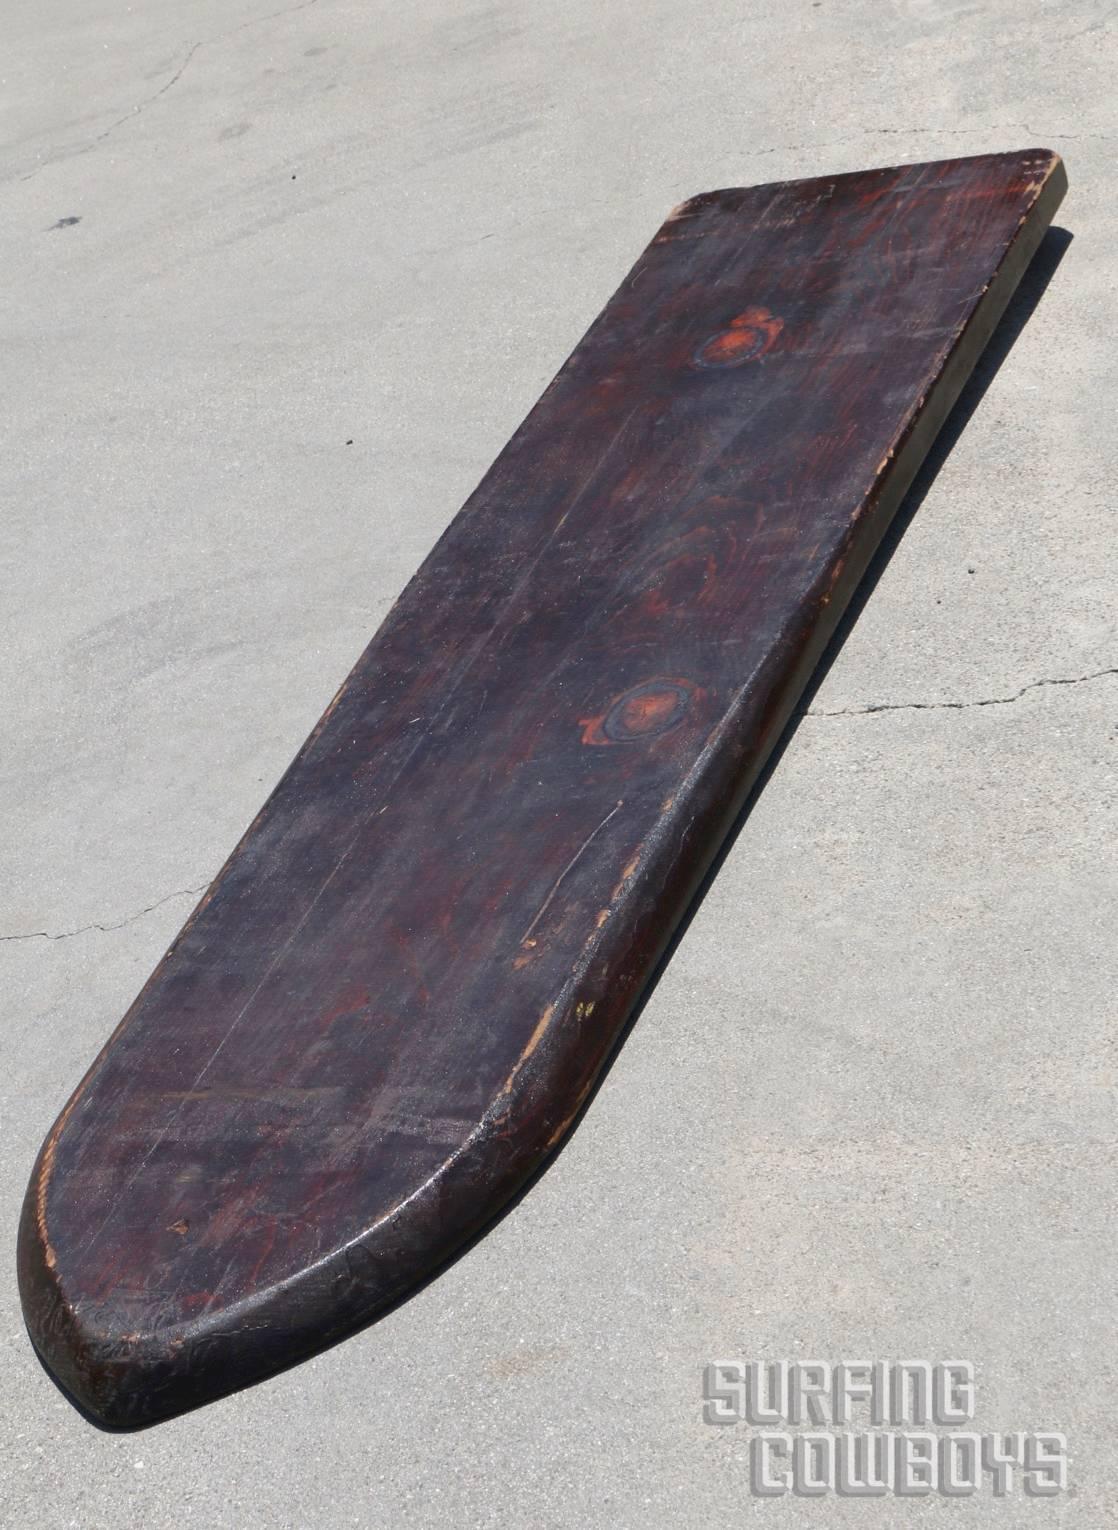 Solid Wood Surfboard, circa 1920s, Hand Shaped, All Original  
This beautiful solid wood surfboard is from the the 1920s. The board was hand shaped with a hard top rail and rounded lower rails that would have allowed for smooth turning. The nose